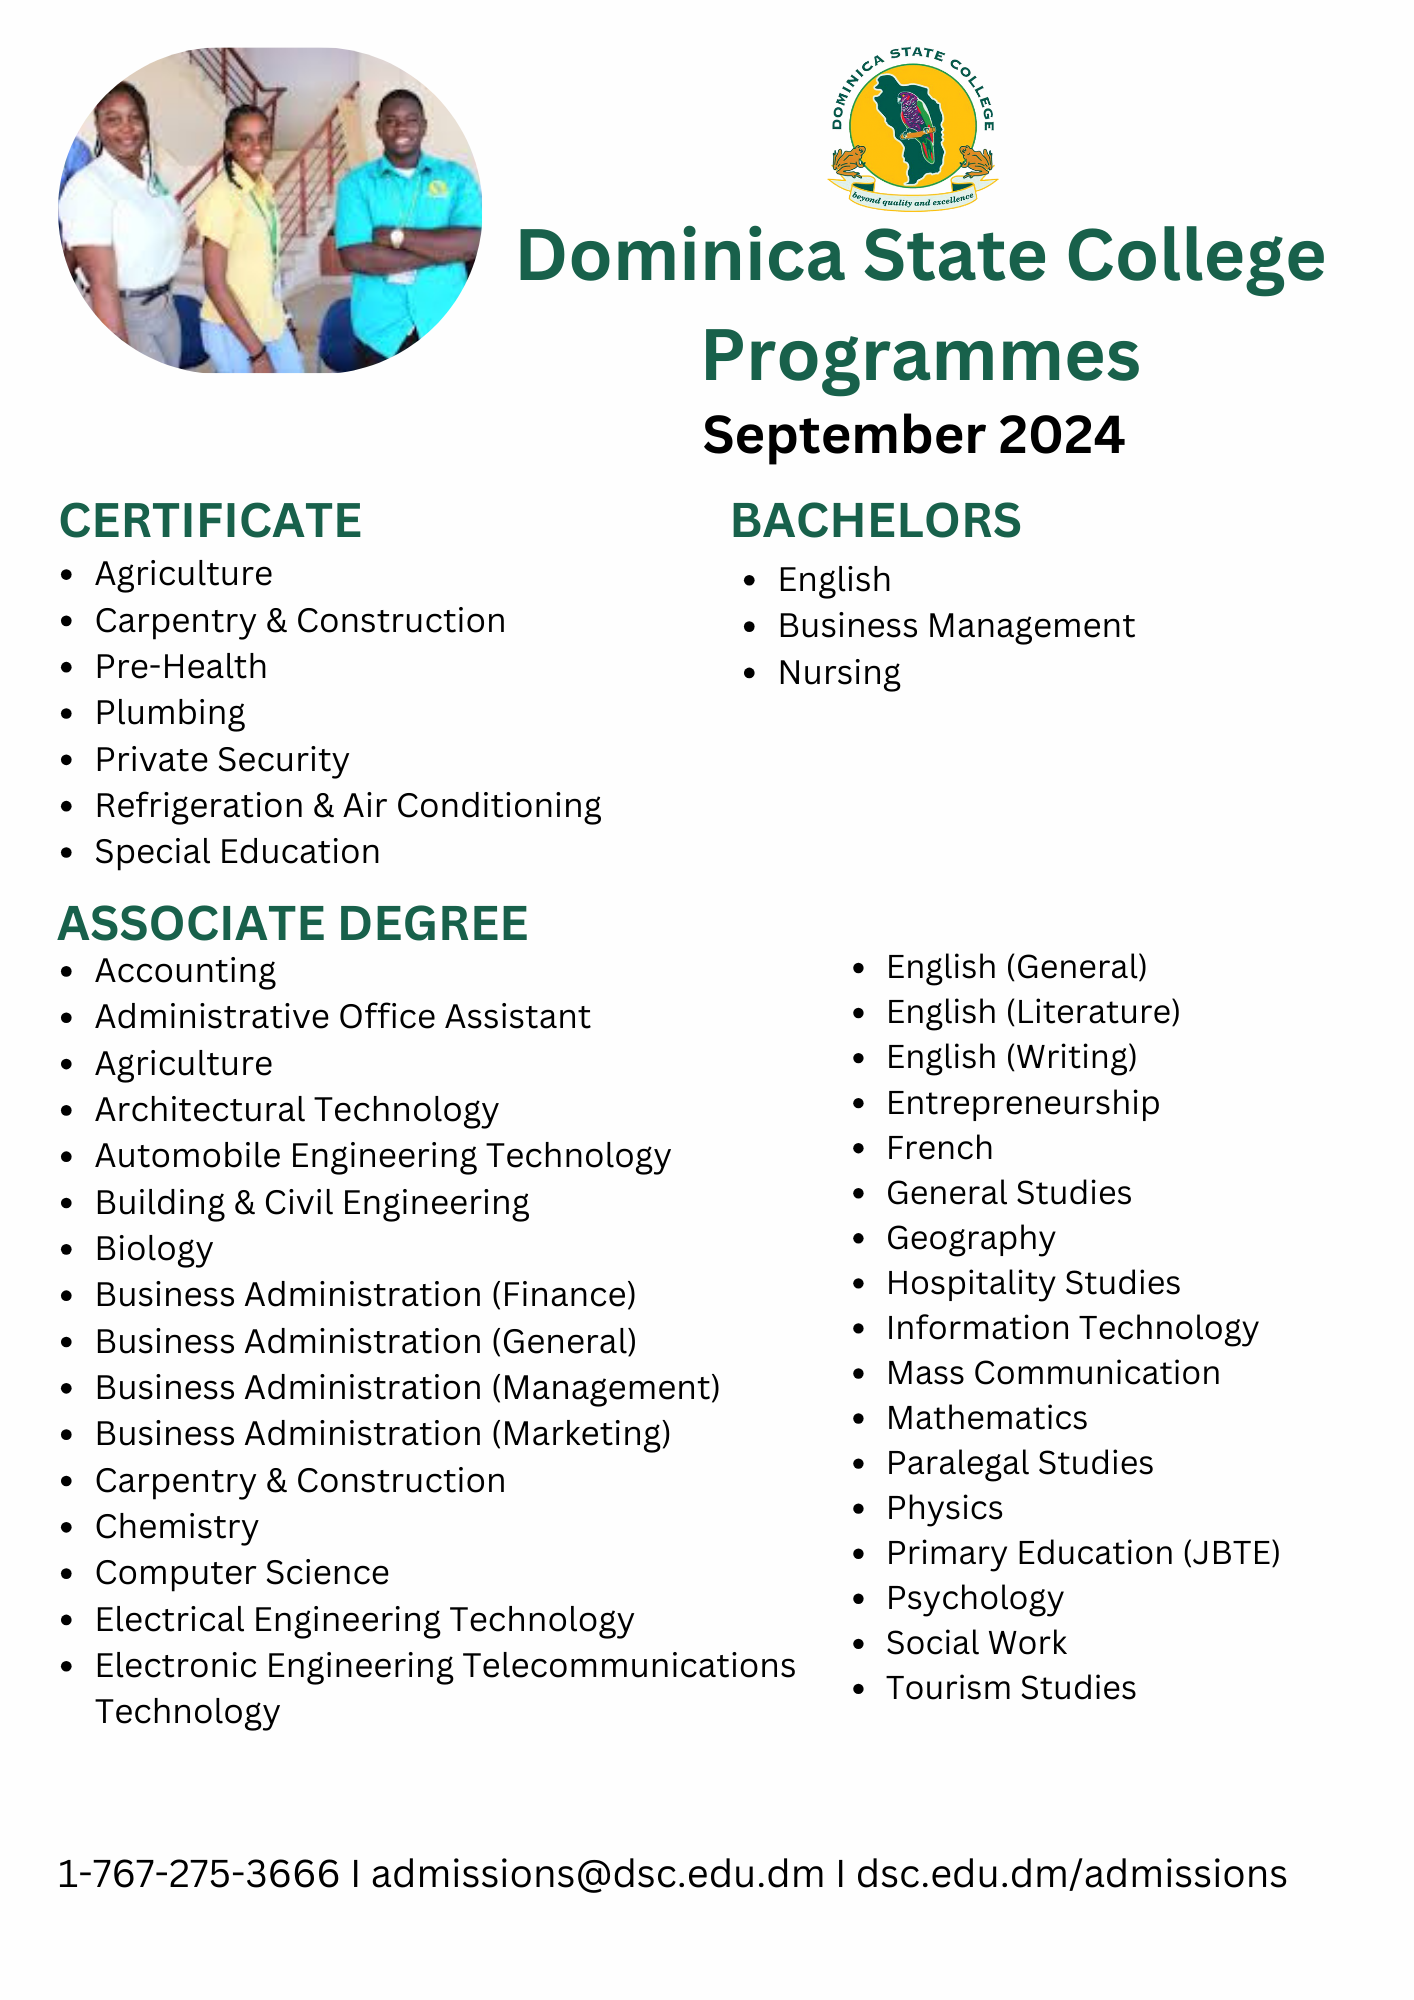 Dominica State College Programmes (1)